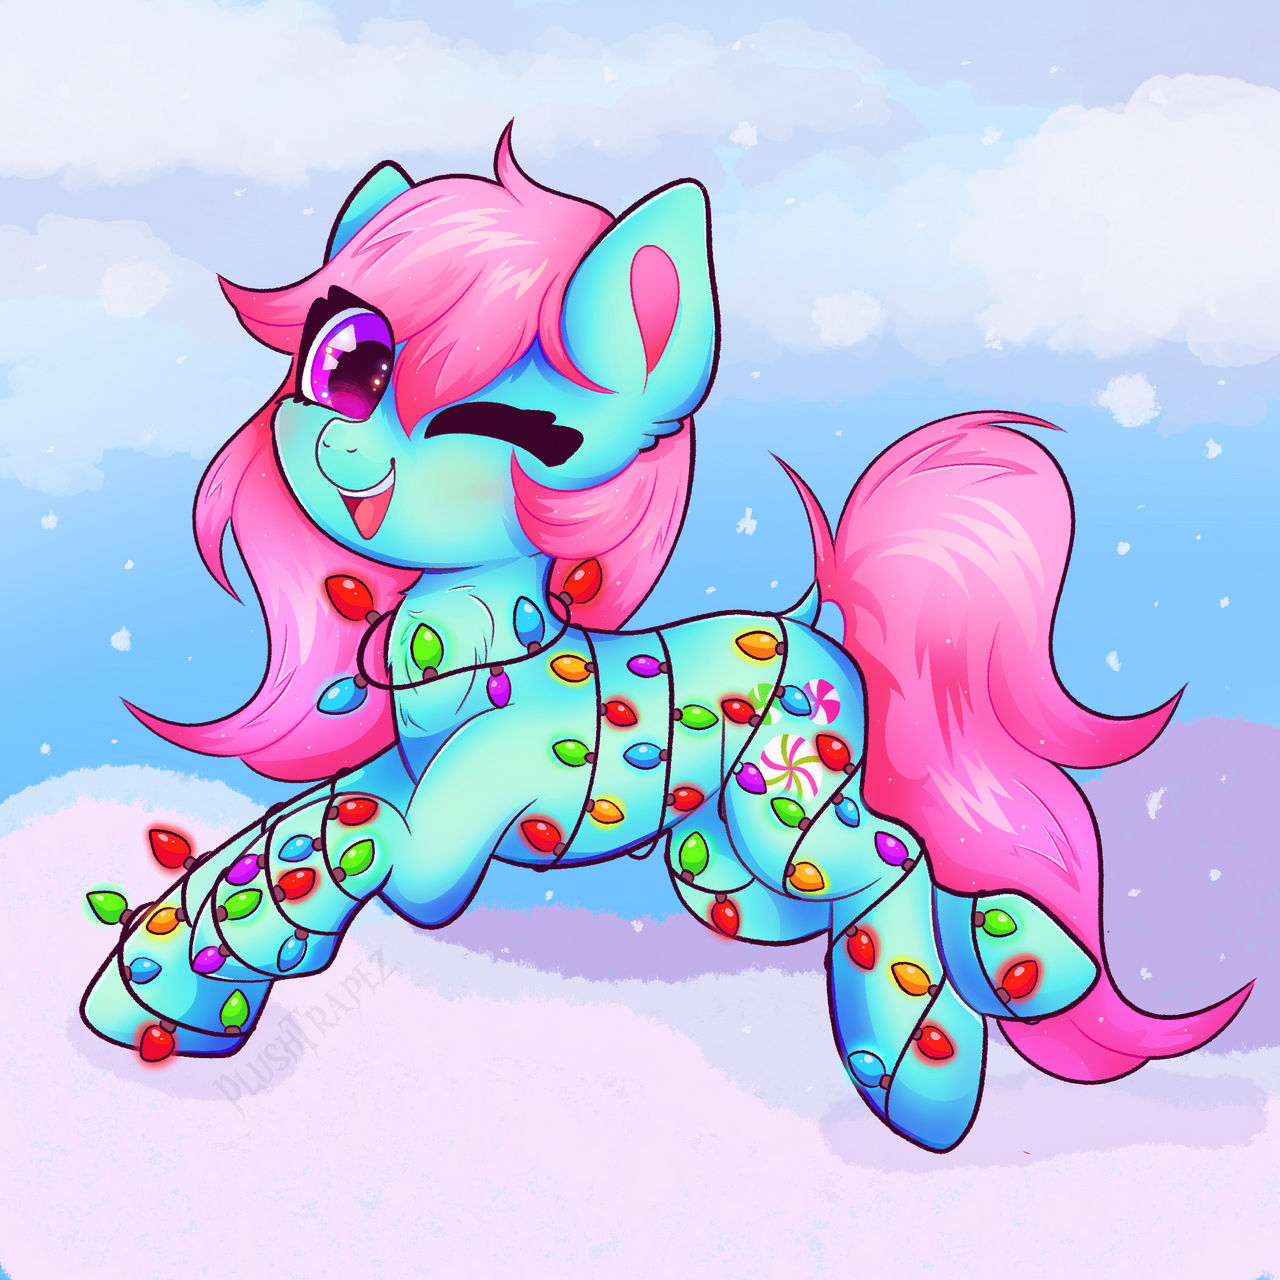 a_very_minty_christmas_by_plushtrapez_dfjf9hb-fullview.jpg